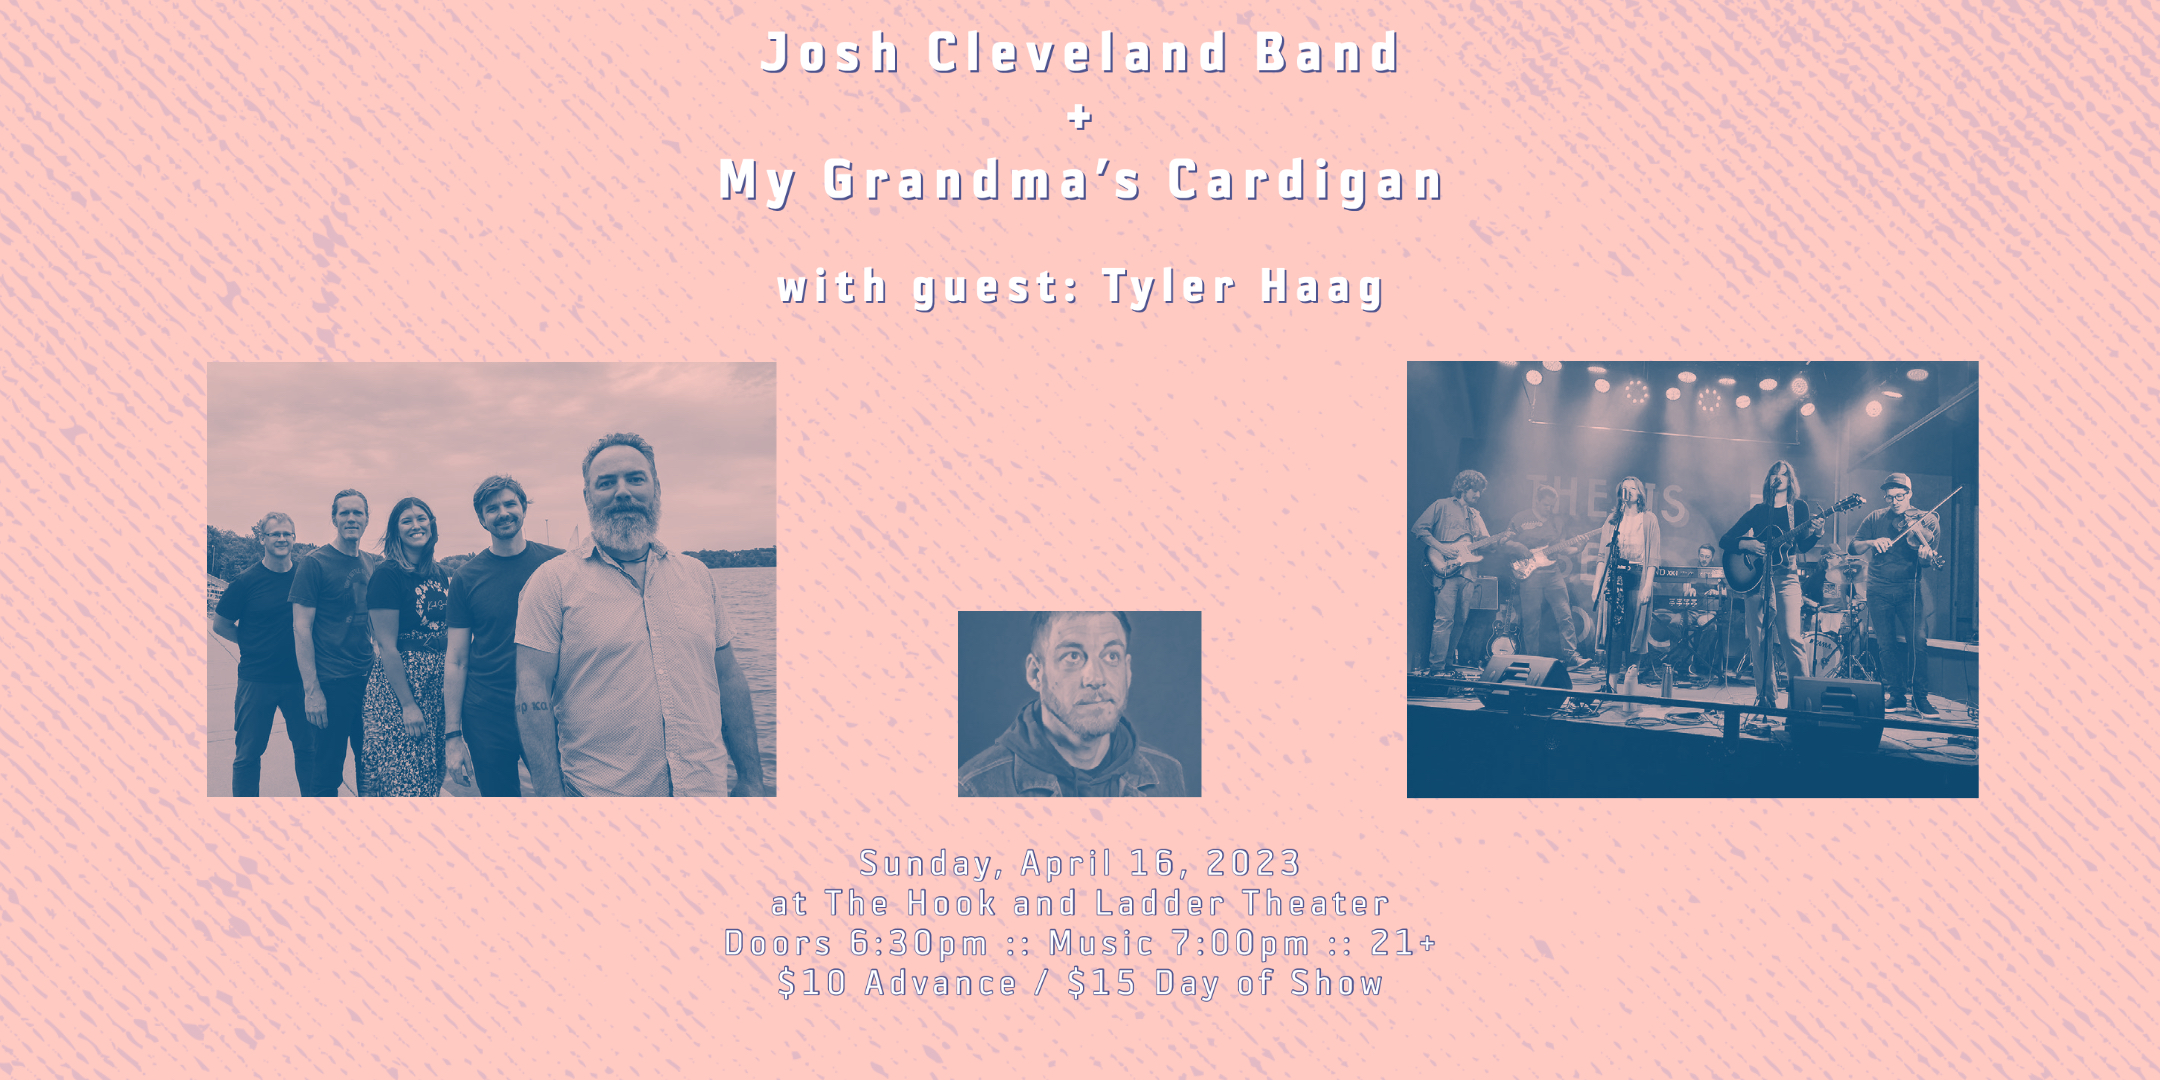 Josh Cleveland Band + My Grandma's Cardigan w/ guest Tyler Haag Sunday, April 16, 2023 at The Hook and Ladder Theater Doors 6:30pm :: Music 7:00pm :: 21+ $10 Advance / $15 Day of Show